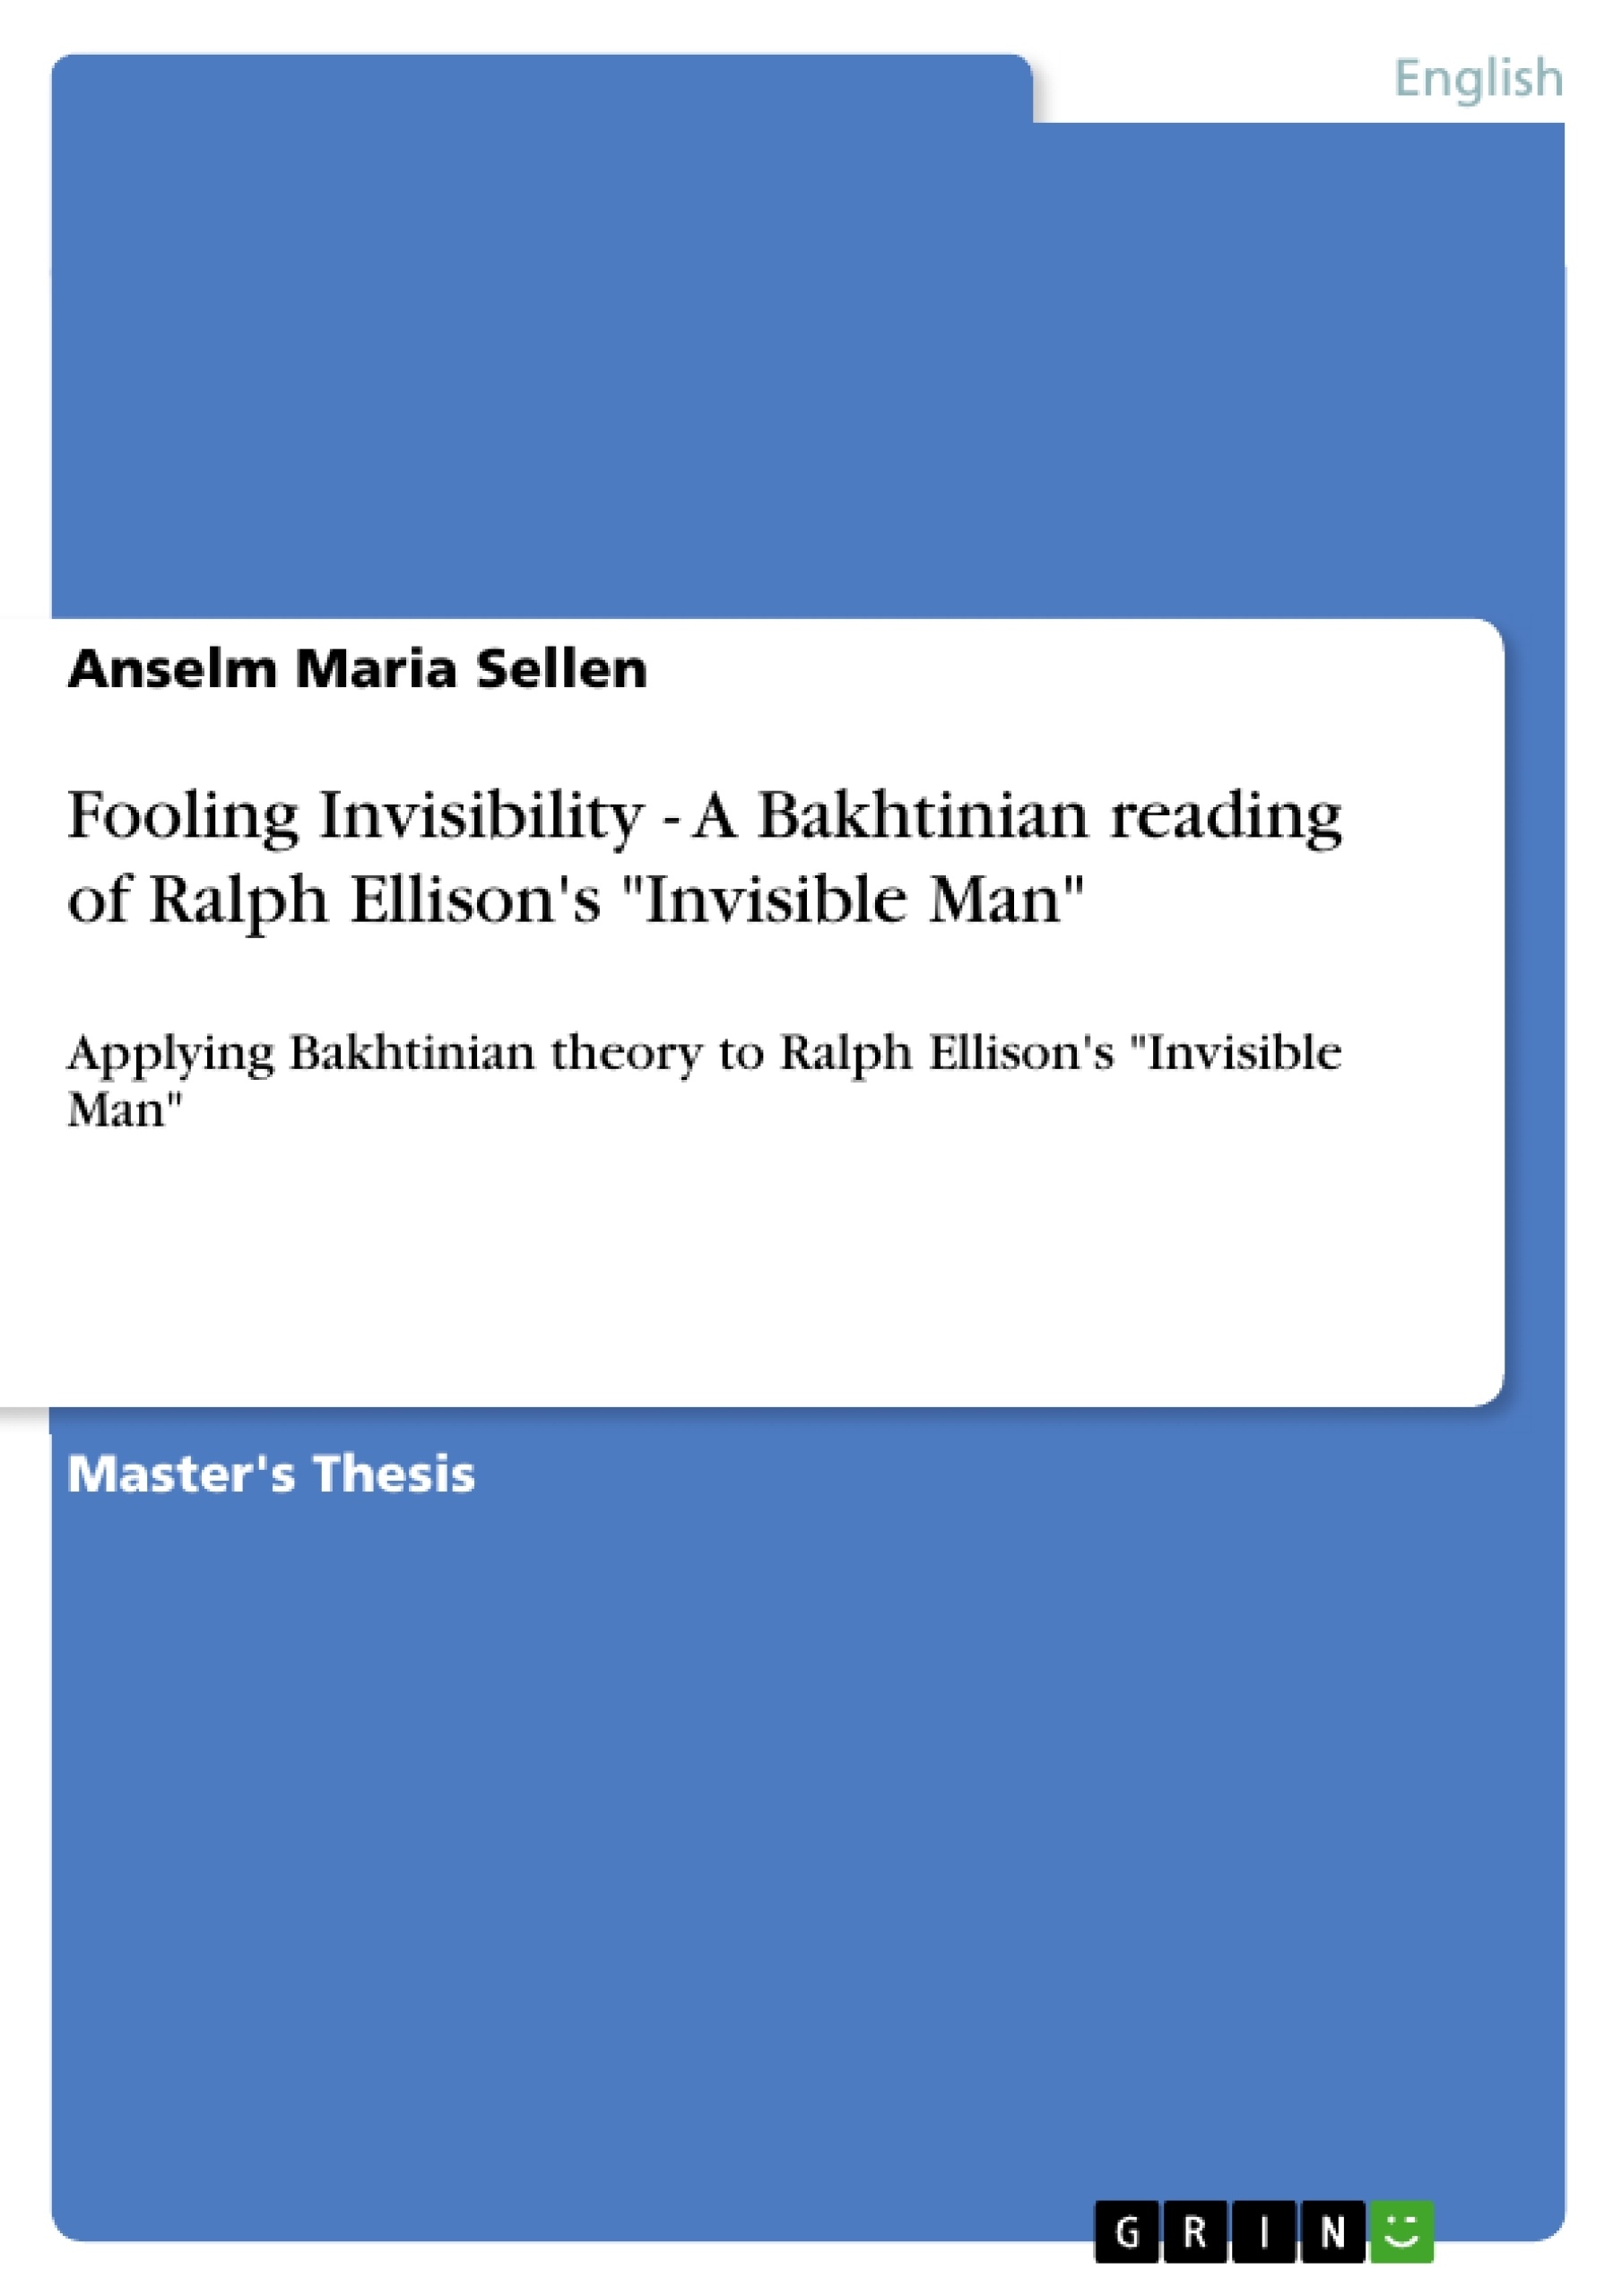 Titel: Fooling Invisibility - A Bakhtinian reading of Ralph Ellison's "Invisible Man"